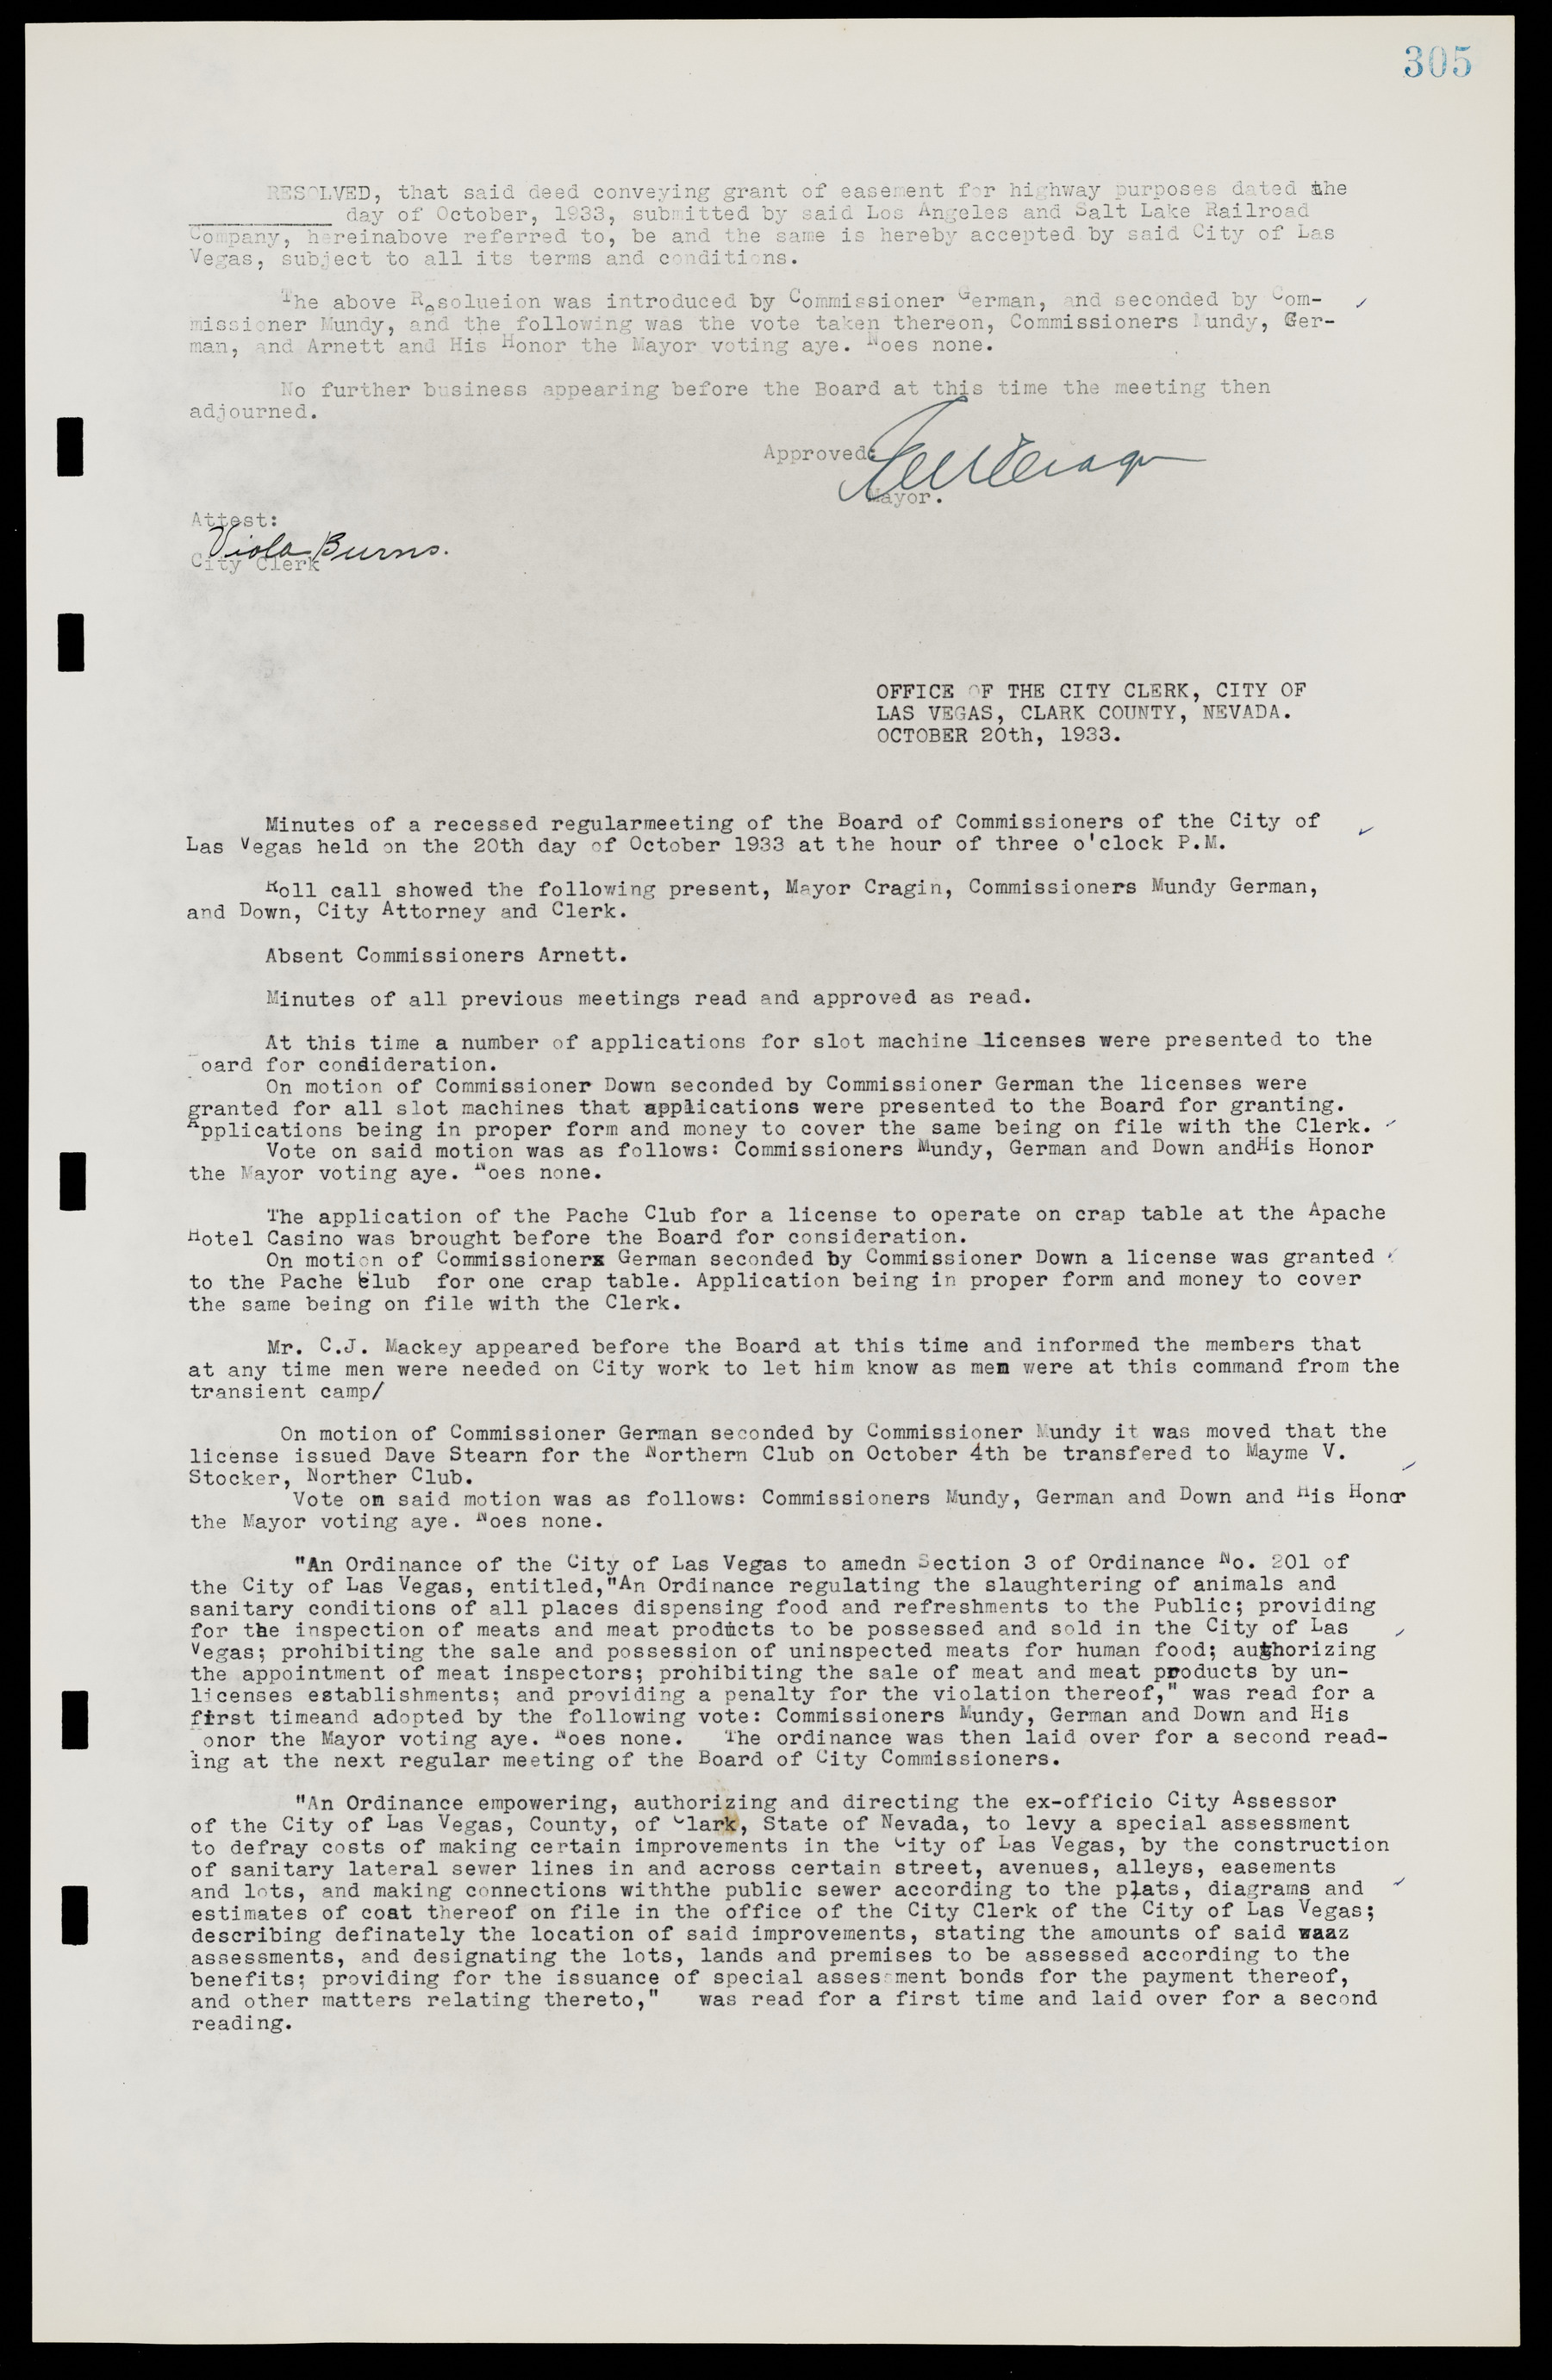 Las Vegas City Commission Minutes, May 14, 1929 to February 11, 1937, lvc000003-312